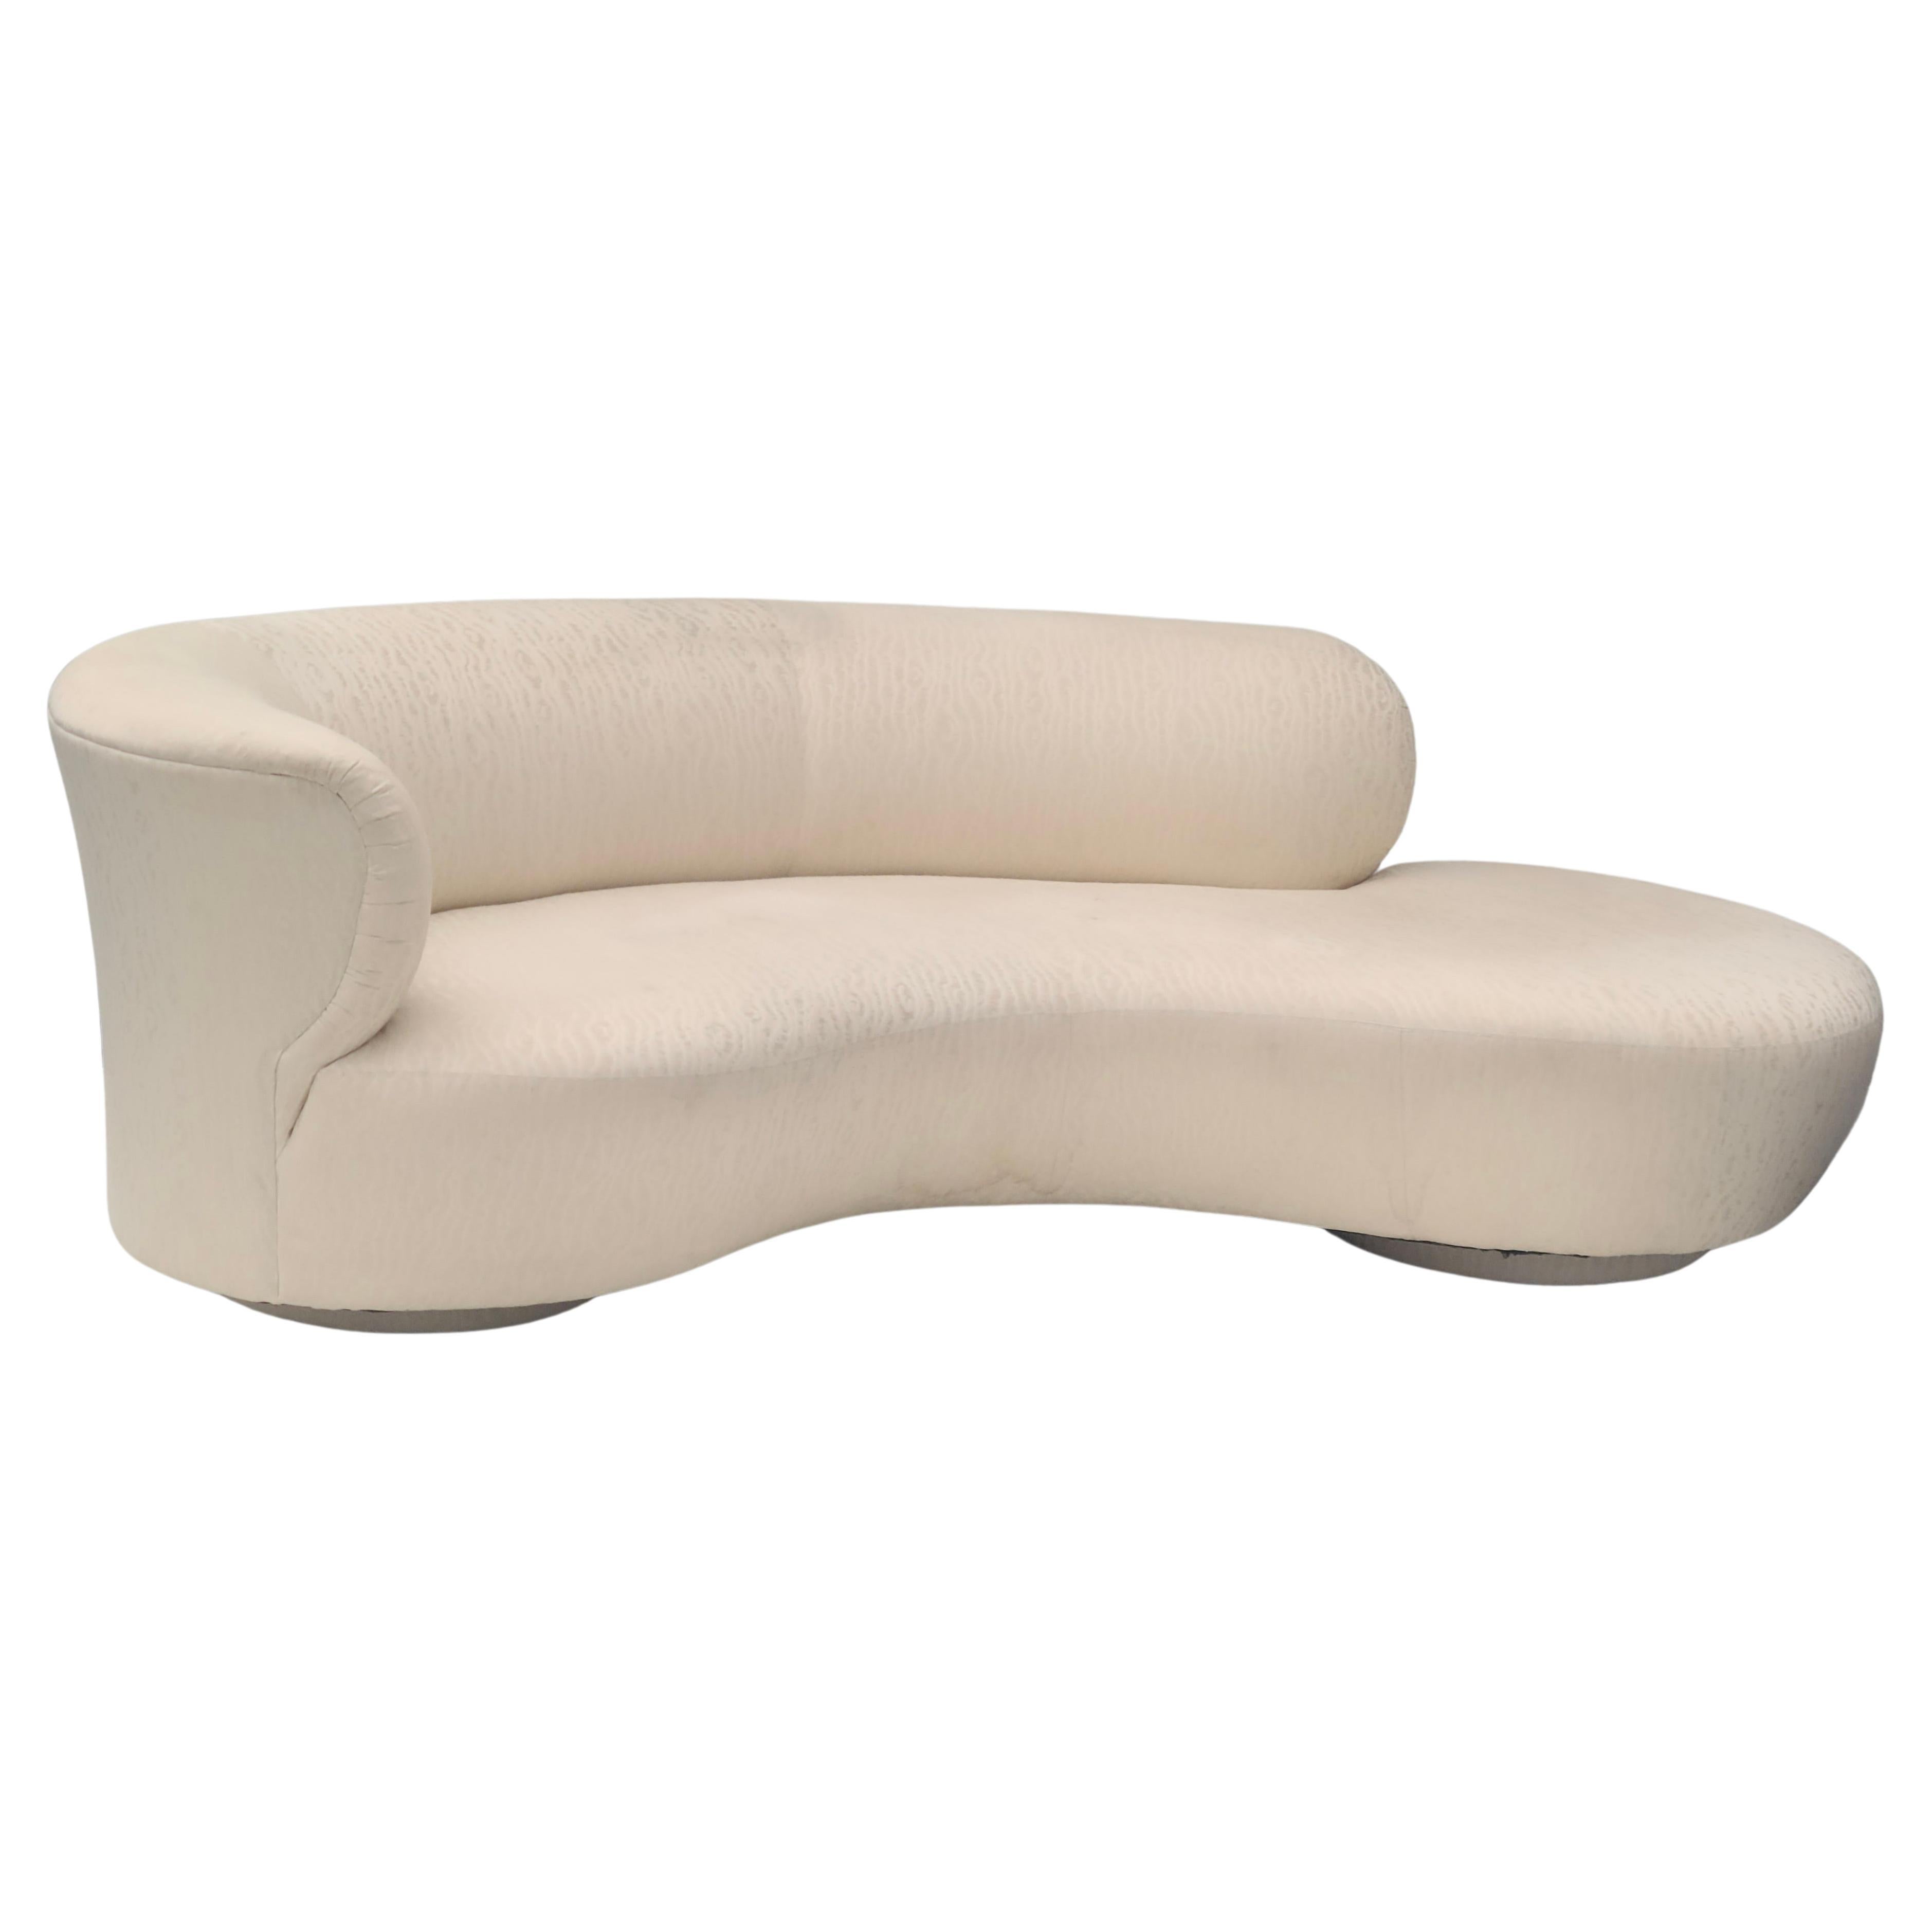 Please feel free to reach out for efficient shipping to your location.

Vladimir Kagan Cloud Sofa.
Vladimir Kagan serpentine cloud sofa. Original cream colored fabric. Best to recover. For Restoration.